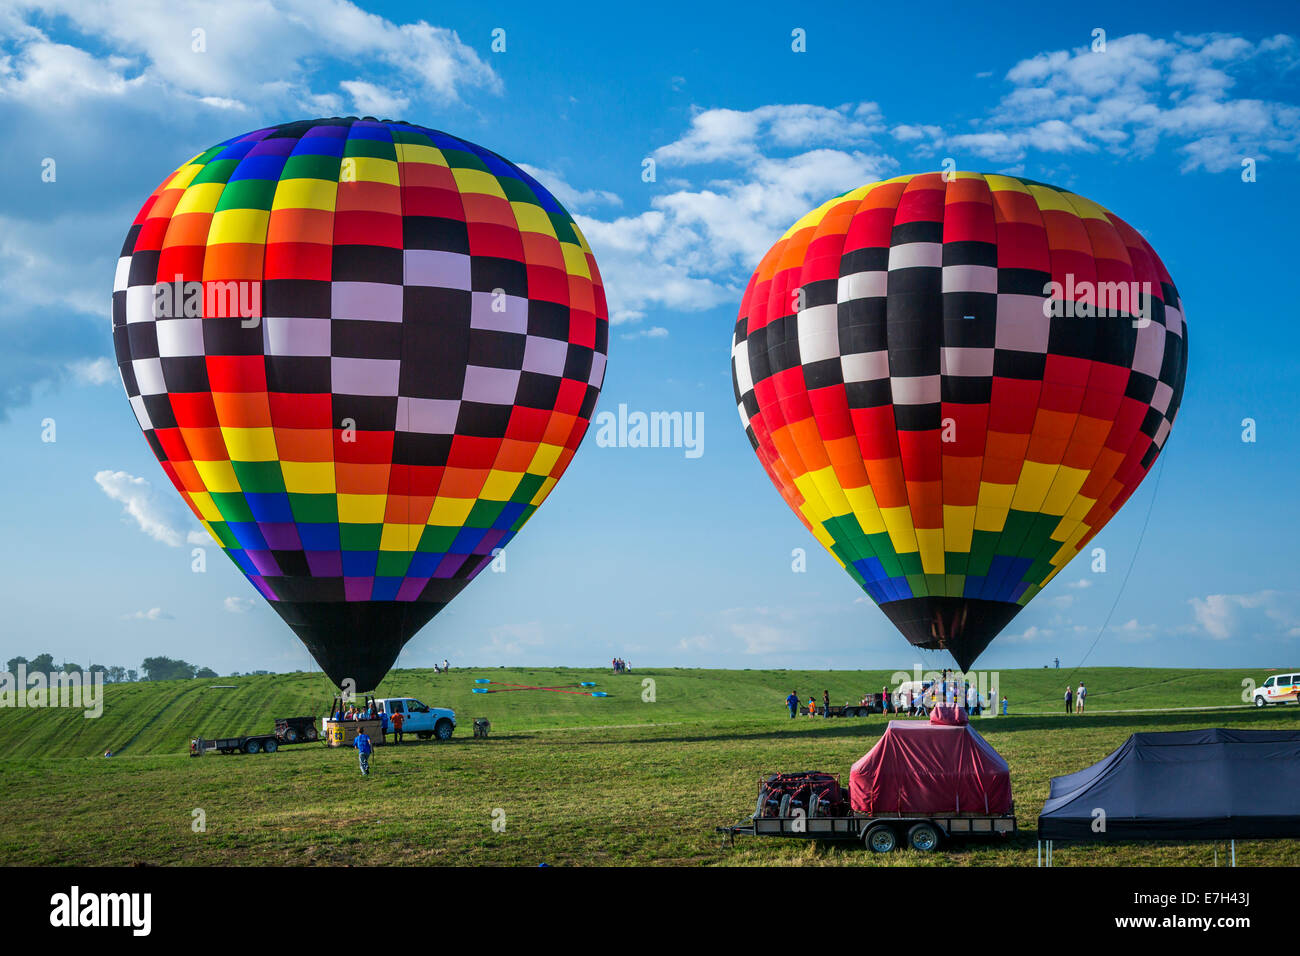 Hot air balloons and the National Balloon Classic in Indianola, Iowa